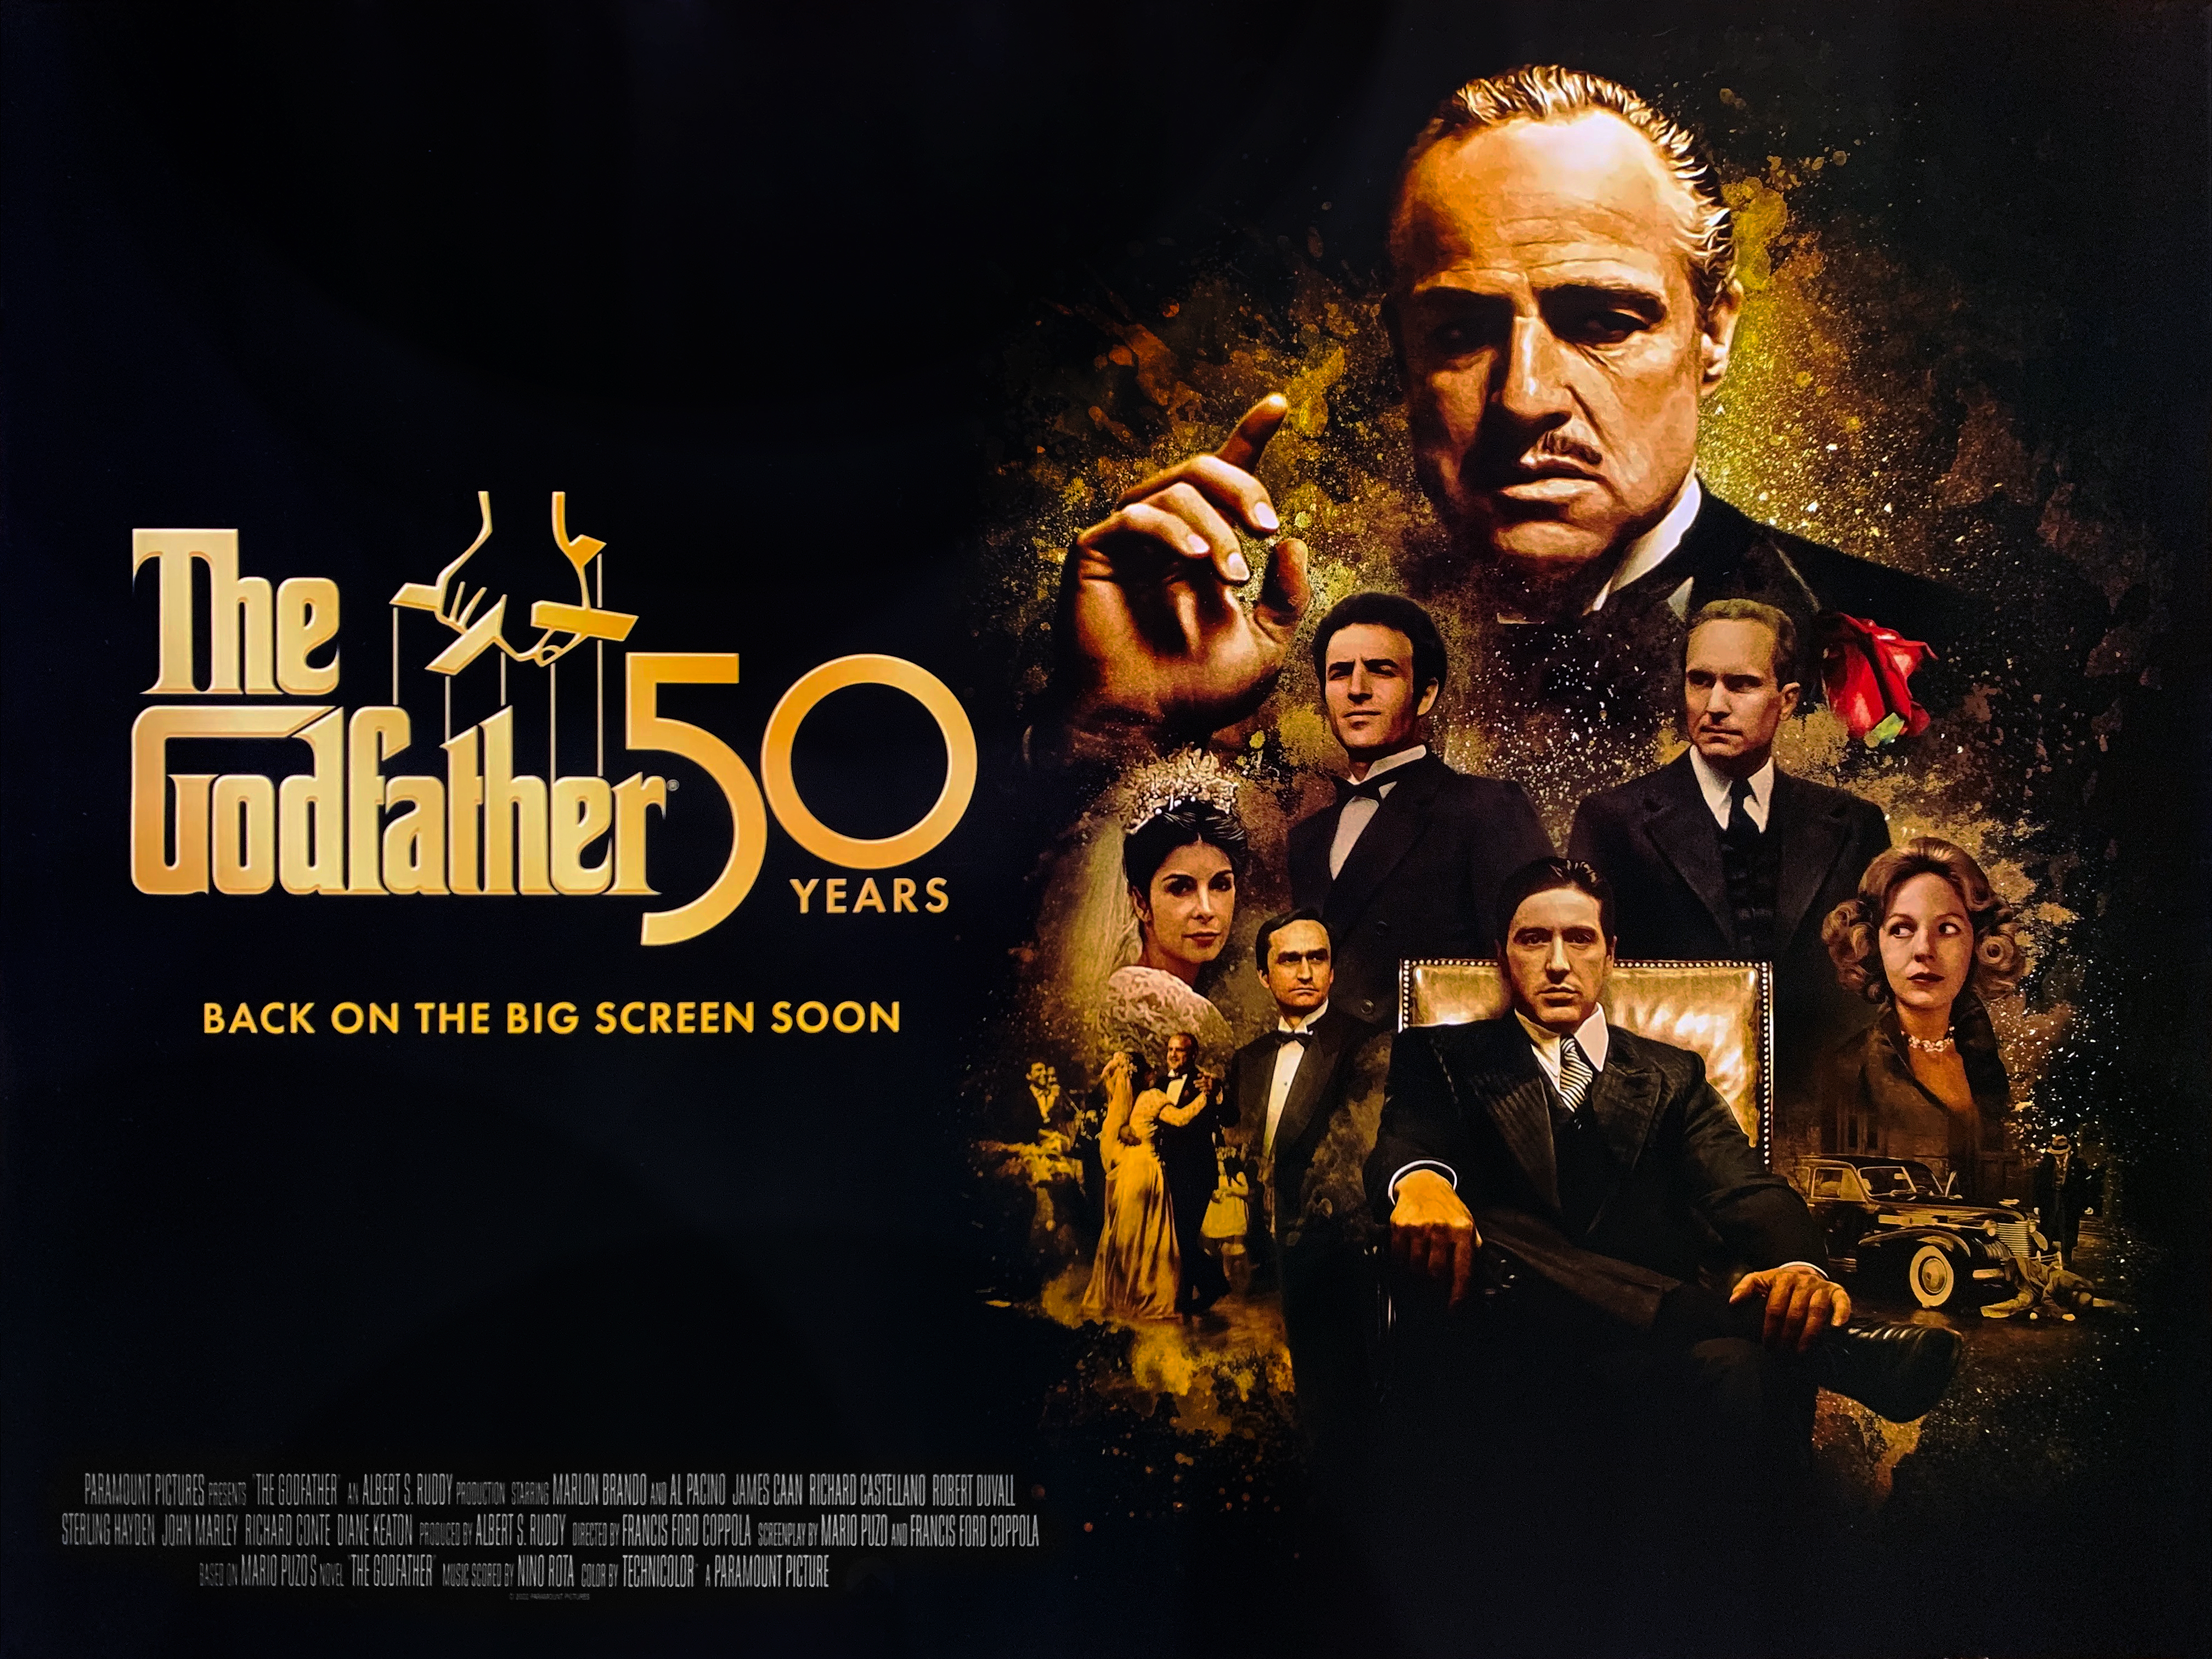 The Godfather 50th anniversary re-release movie quad poster